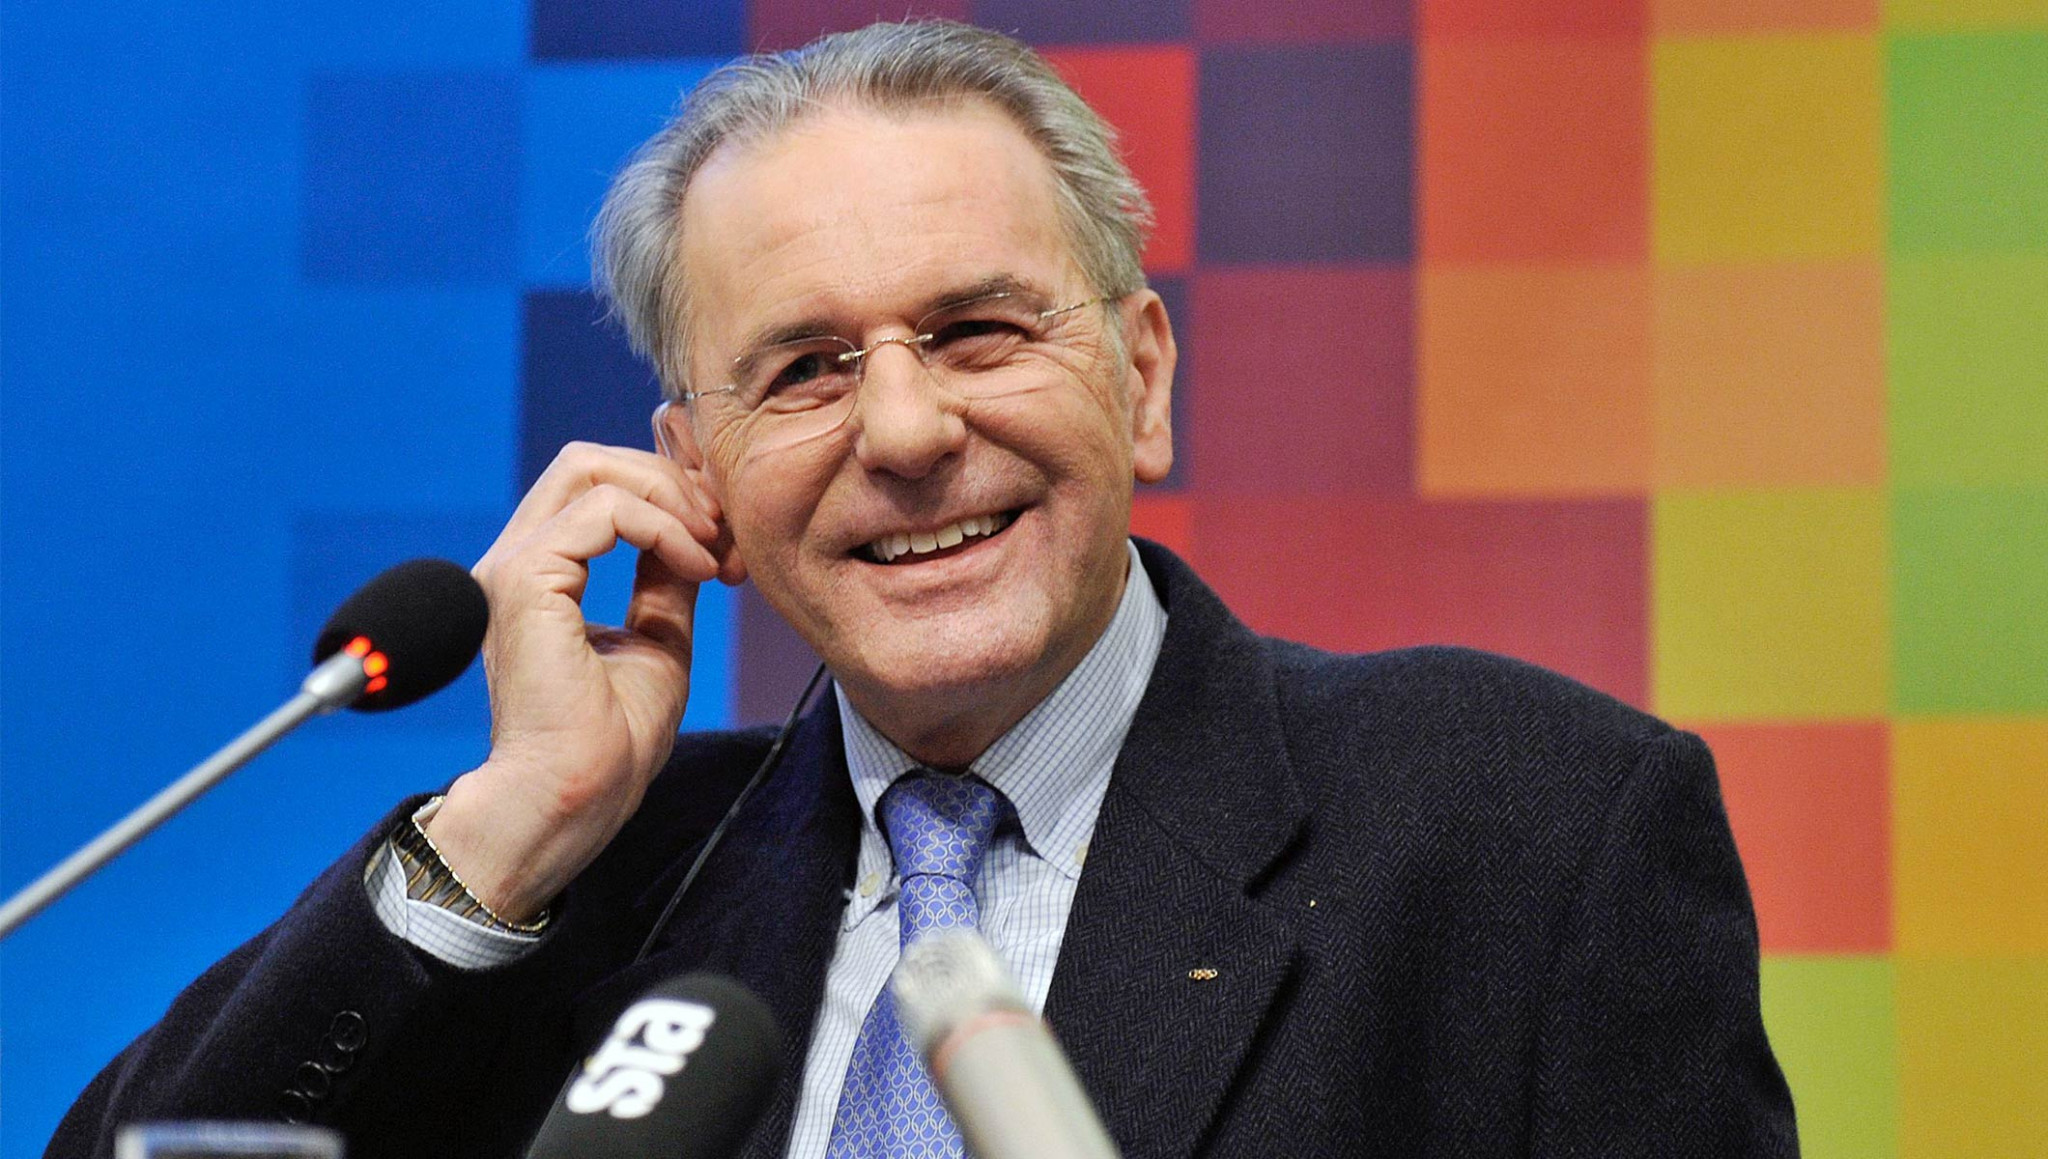 Thomas Bach's predecessor as IOC President, Jacques Rogge, had a very different style ©IOC